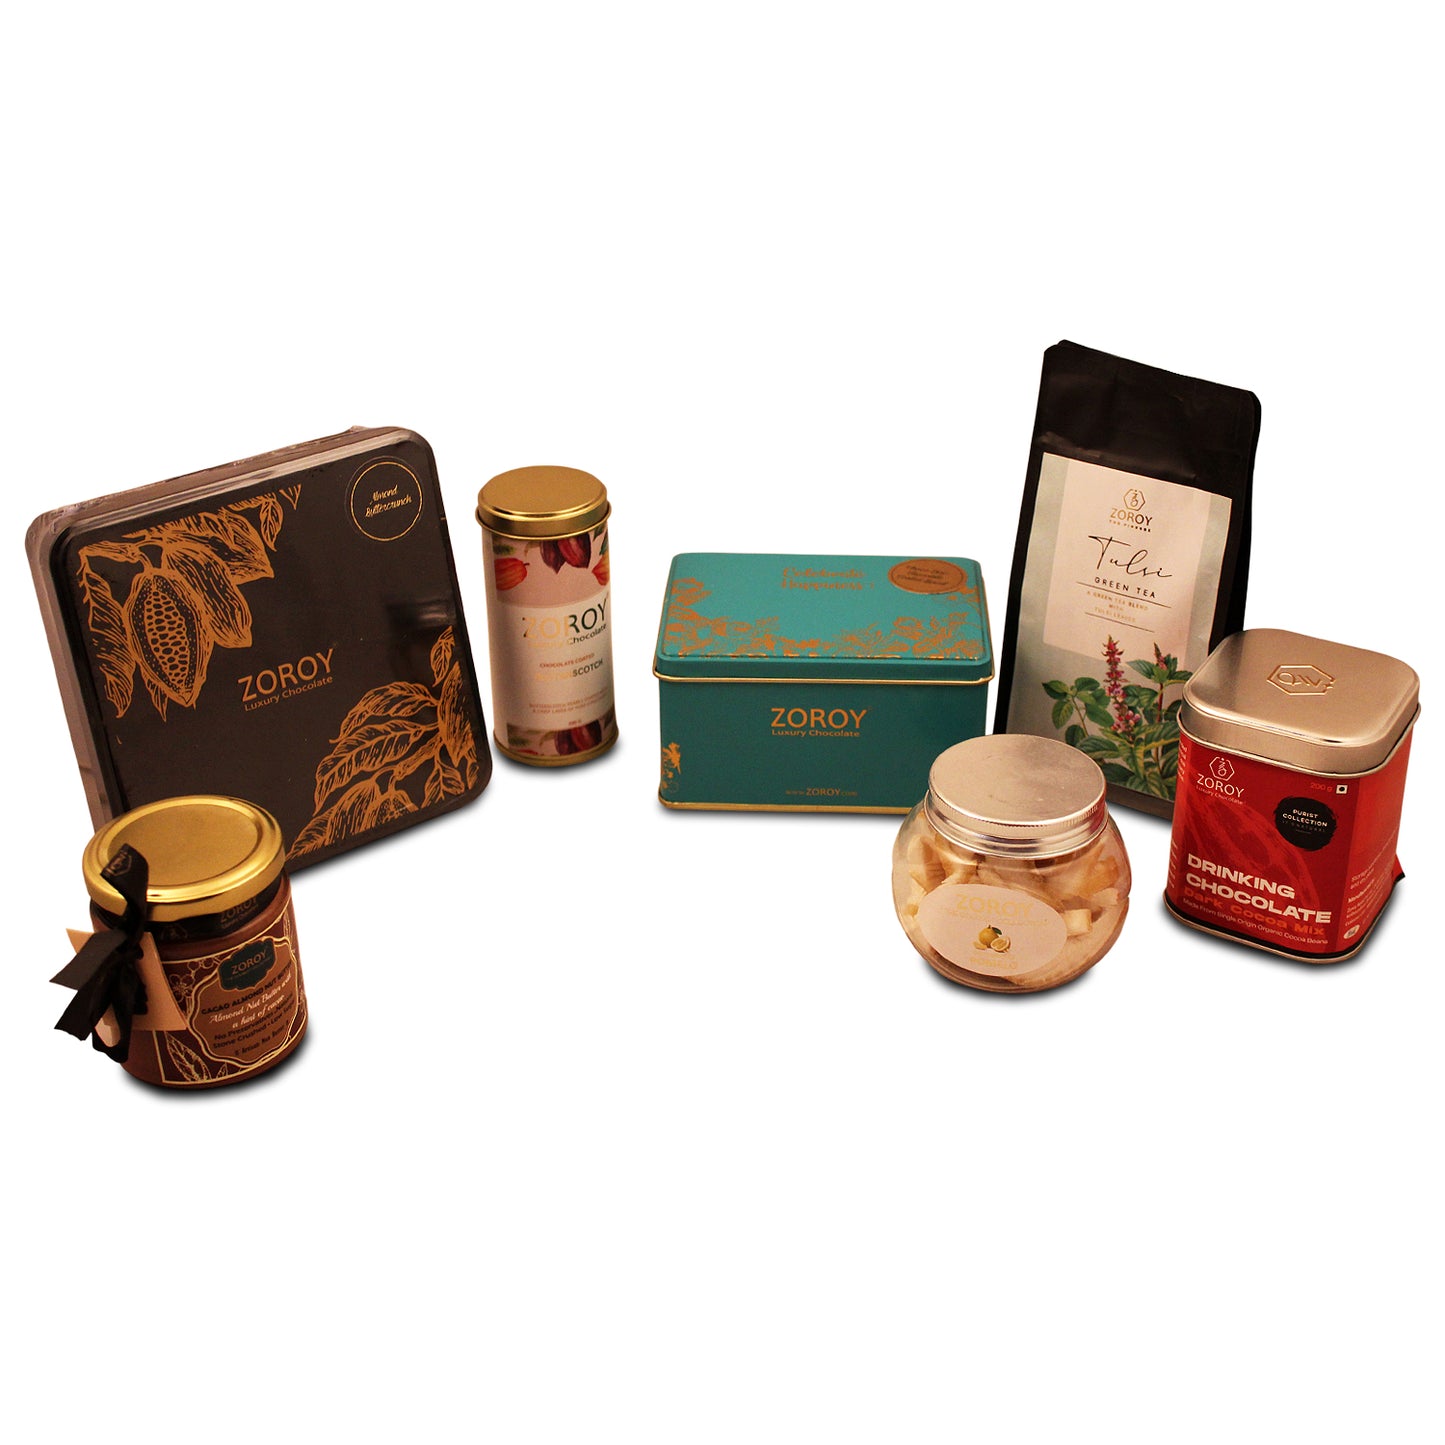 ZOROY LUXURY CHOCOLATE Everything Special Neel Gift Hamper | Tulsi Green Tea | Drinking Chocolate | Almond Buttercrunch | Cacao Almond Butter | Chocolate coated Biscuit | Coated Nuts | Dehydrated fruit